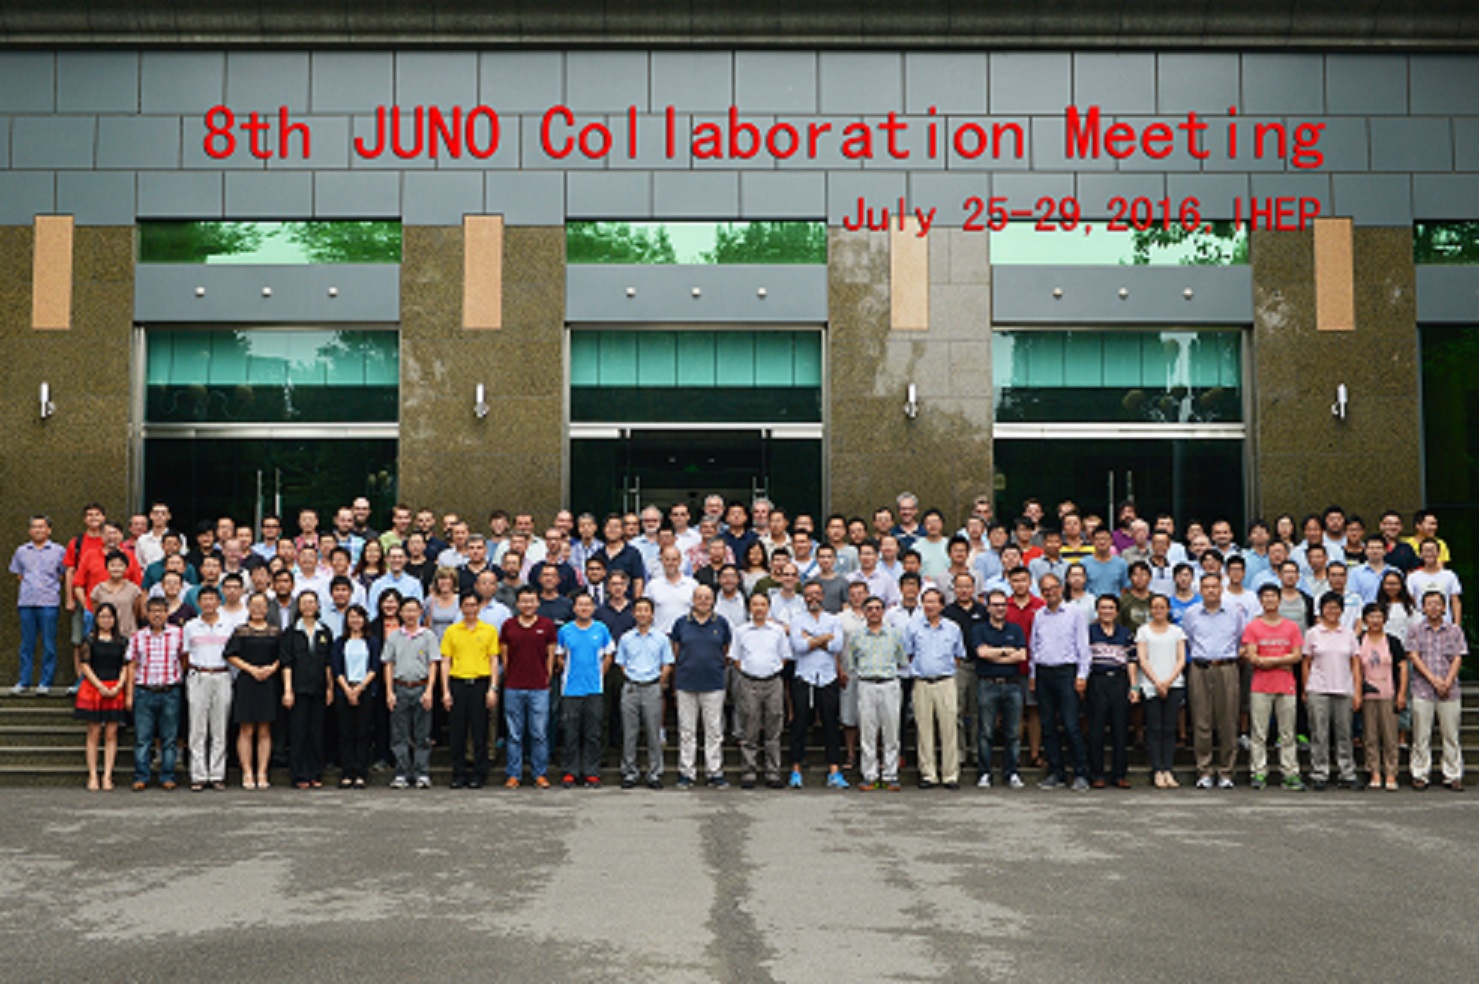 Eighth JUNO Collaboration Meeting Held at IHEP